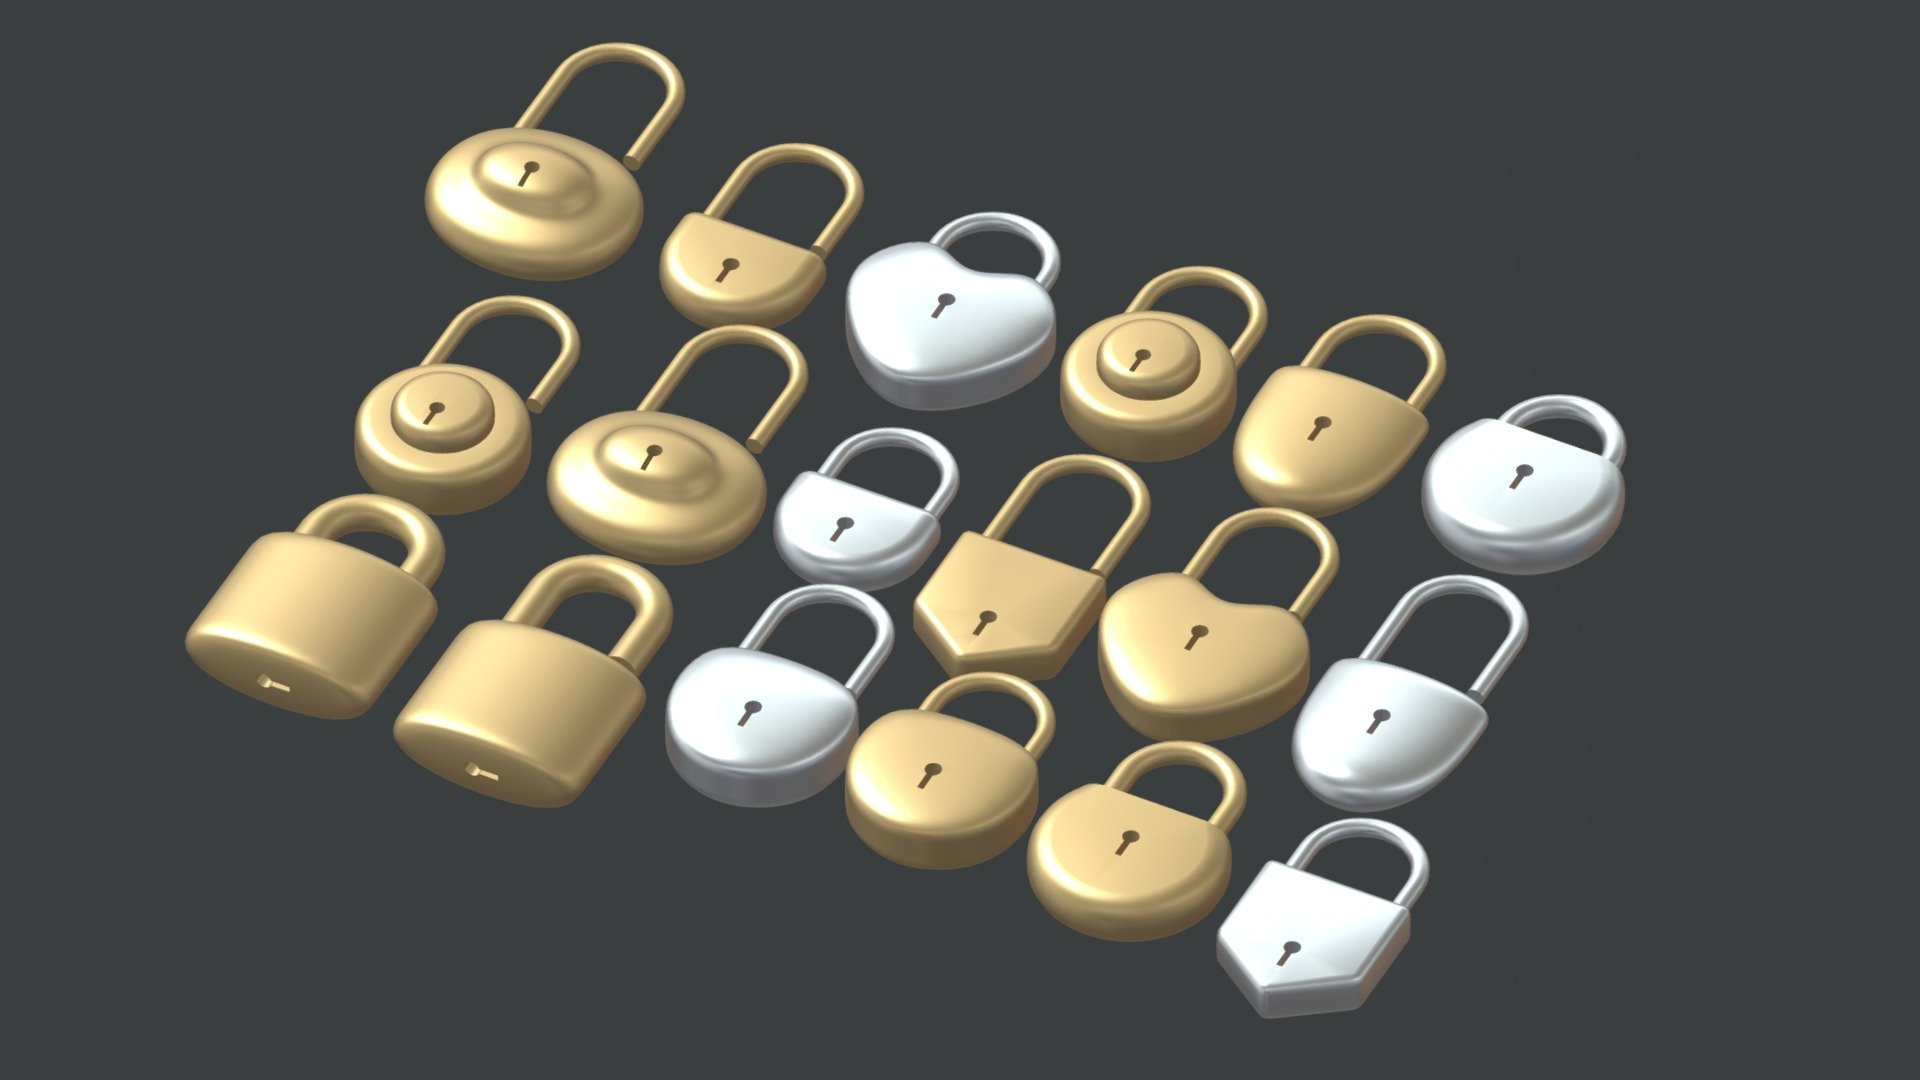 -Padlock Collection.

-This product contains 27 models.

-This product was created in Blender 2.8.

-vertices: 46,066, polygons: 43,241.

-Formats: blend, fbx, obj, c4d, dae, fbx,unity.

-We hope you enjoy this model.

-Thank you 3d model